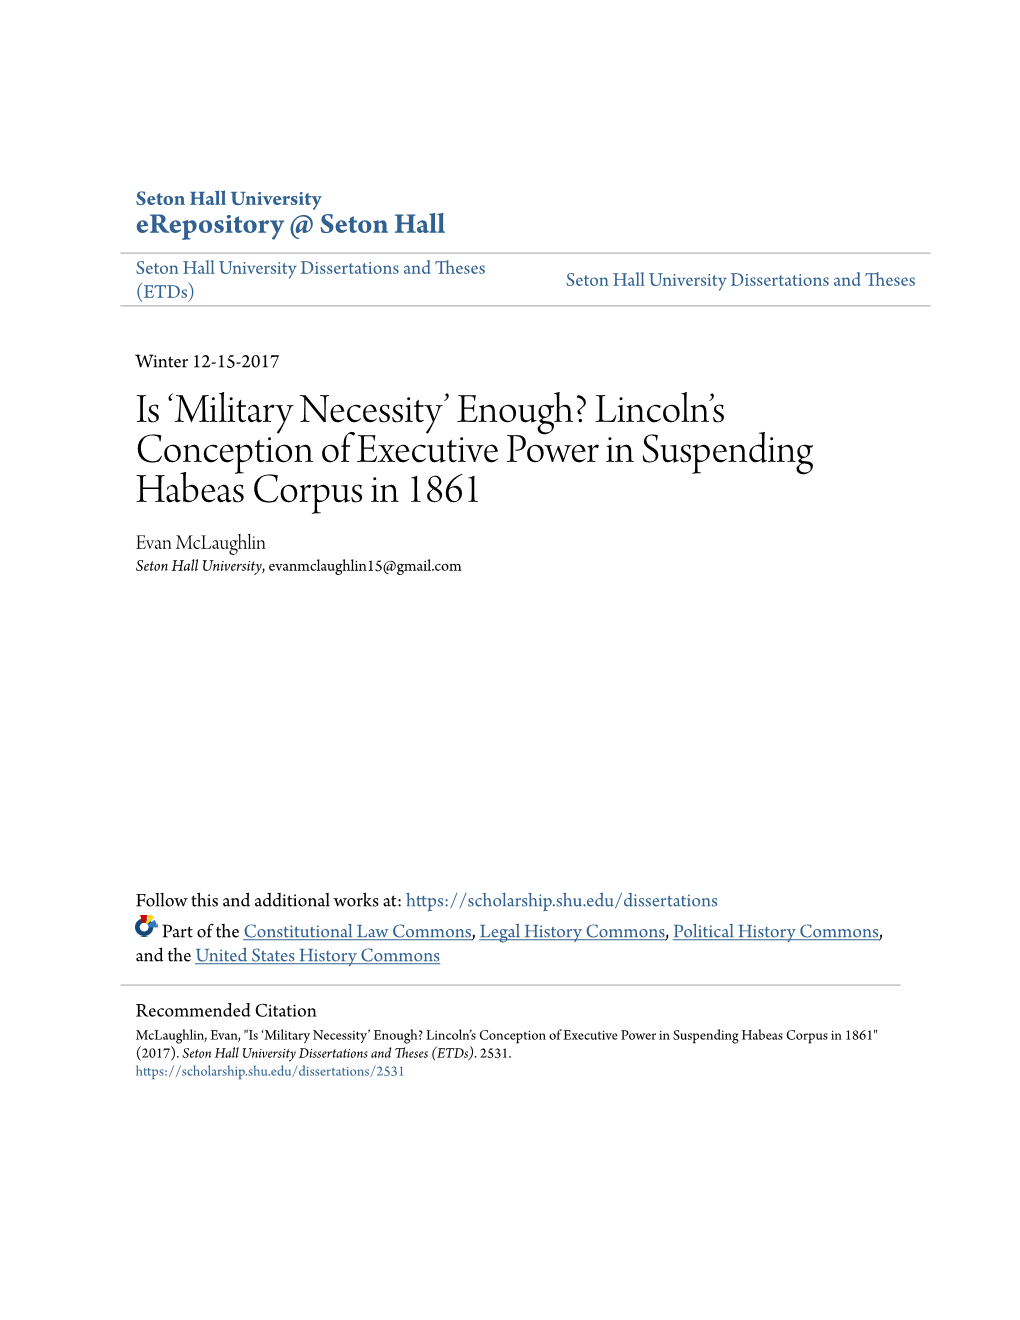 Lincoln's Conception of Executive Power in Suspending Habeas